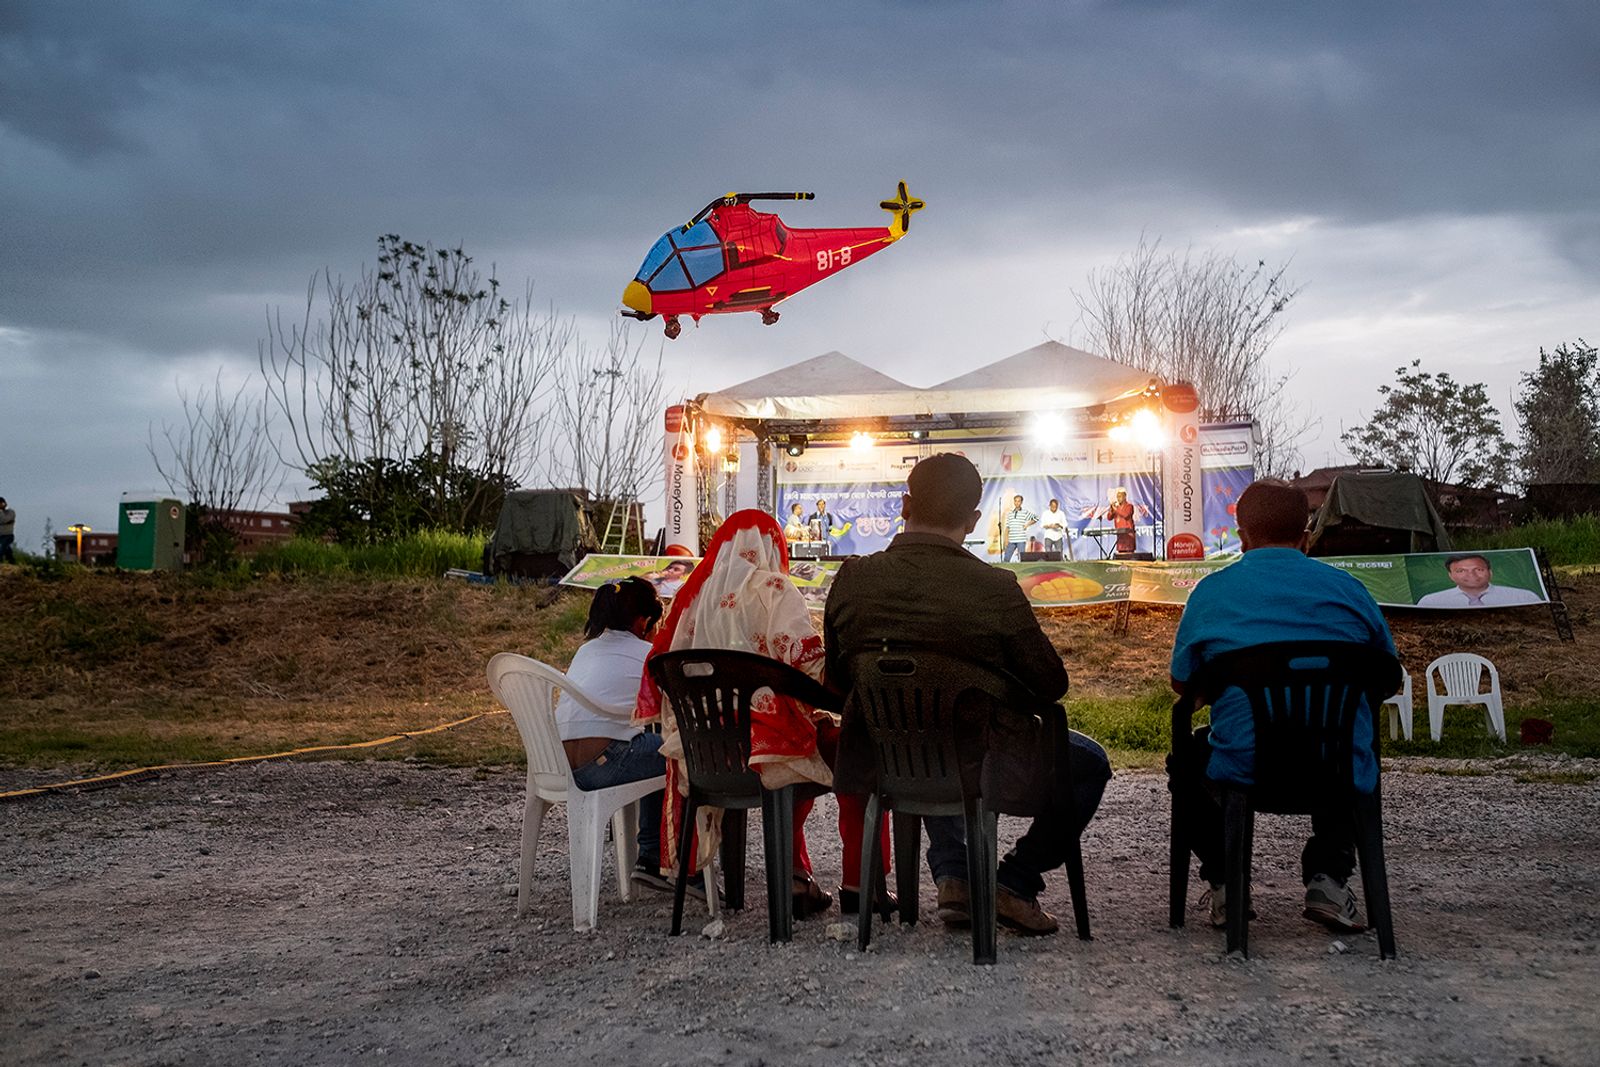 © Paolo Patrizi - A family awaits the beginning of a concert during the new year holidays. An event organised by the Dhuumcatu Association